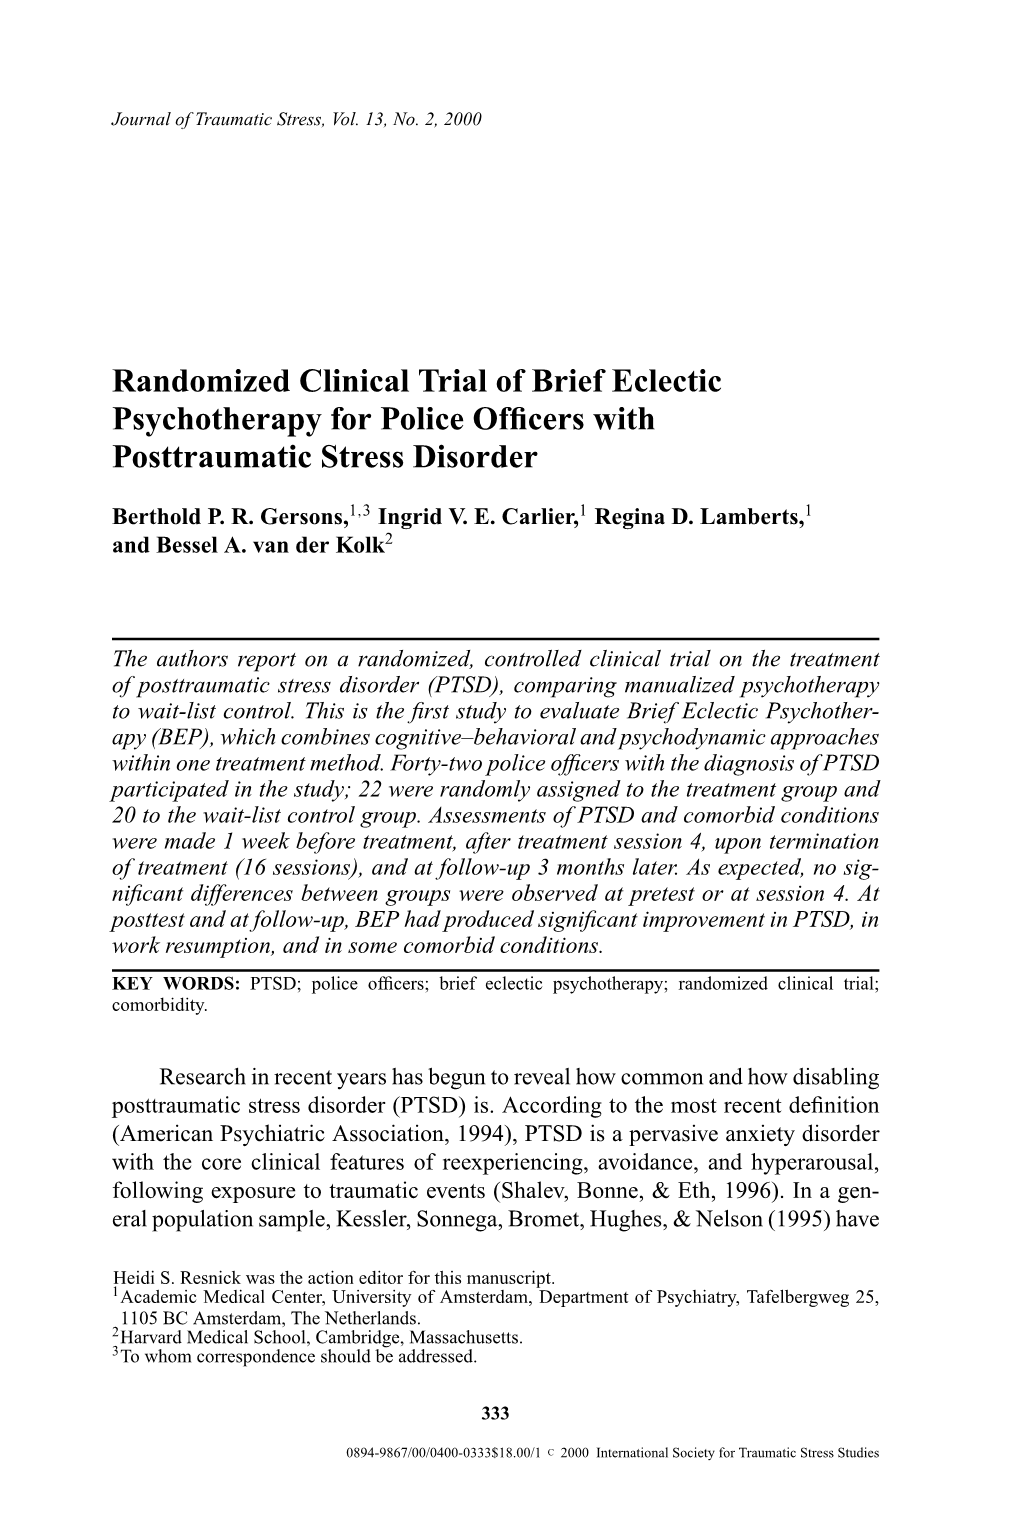 Randomized Clinical Trial of Brief Eclectic Psychotherapy for Police Ofﬁcers with Posttraumatic Stress Disorder